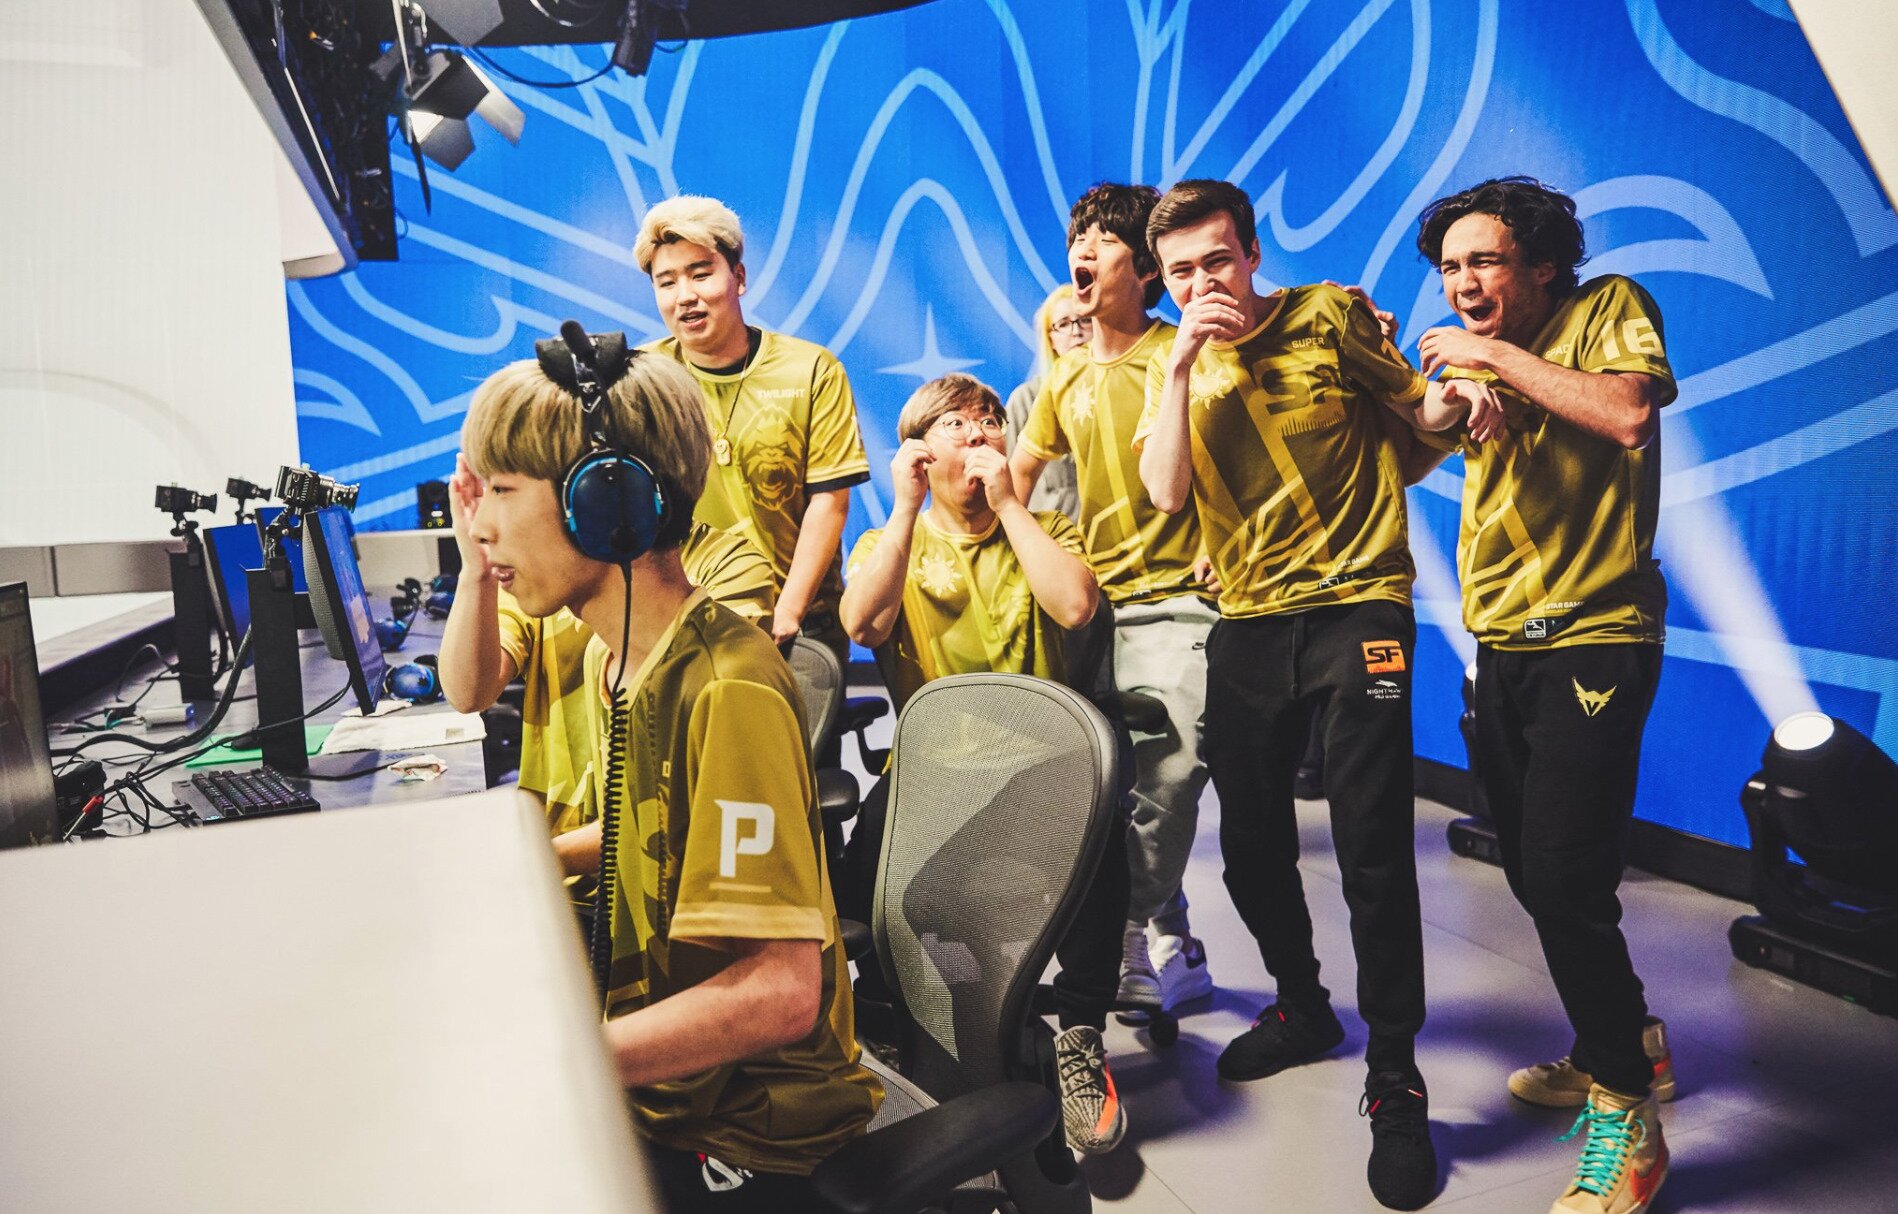 The Widowmaker 1v1 Tournament was the marquee event of the Overwatch League All-Stars 2019 first day (Photo courtesy of OWL)